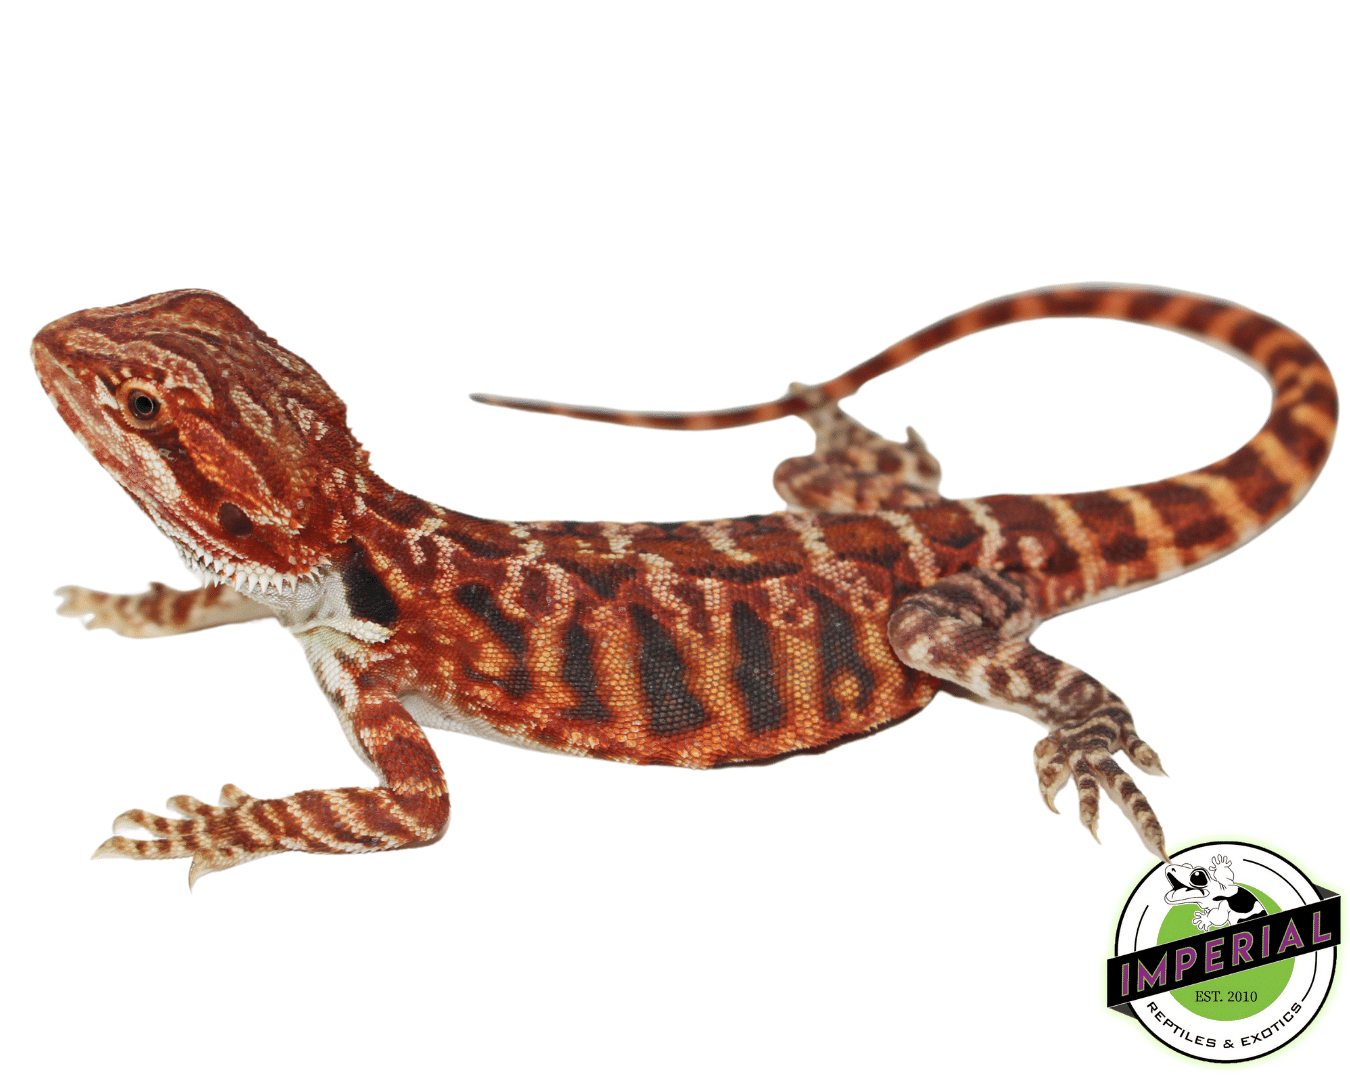 buy bearded dragons online at cheap prices